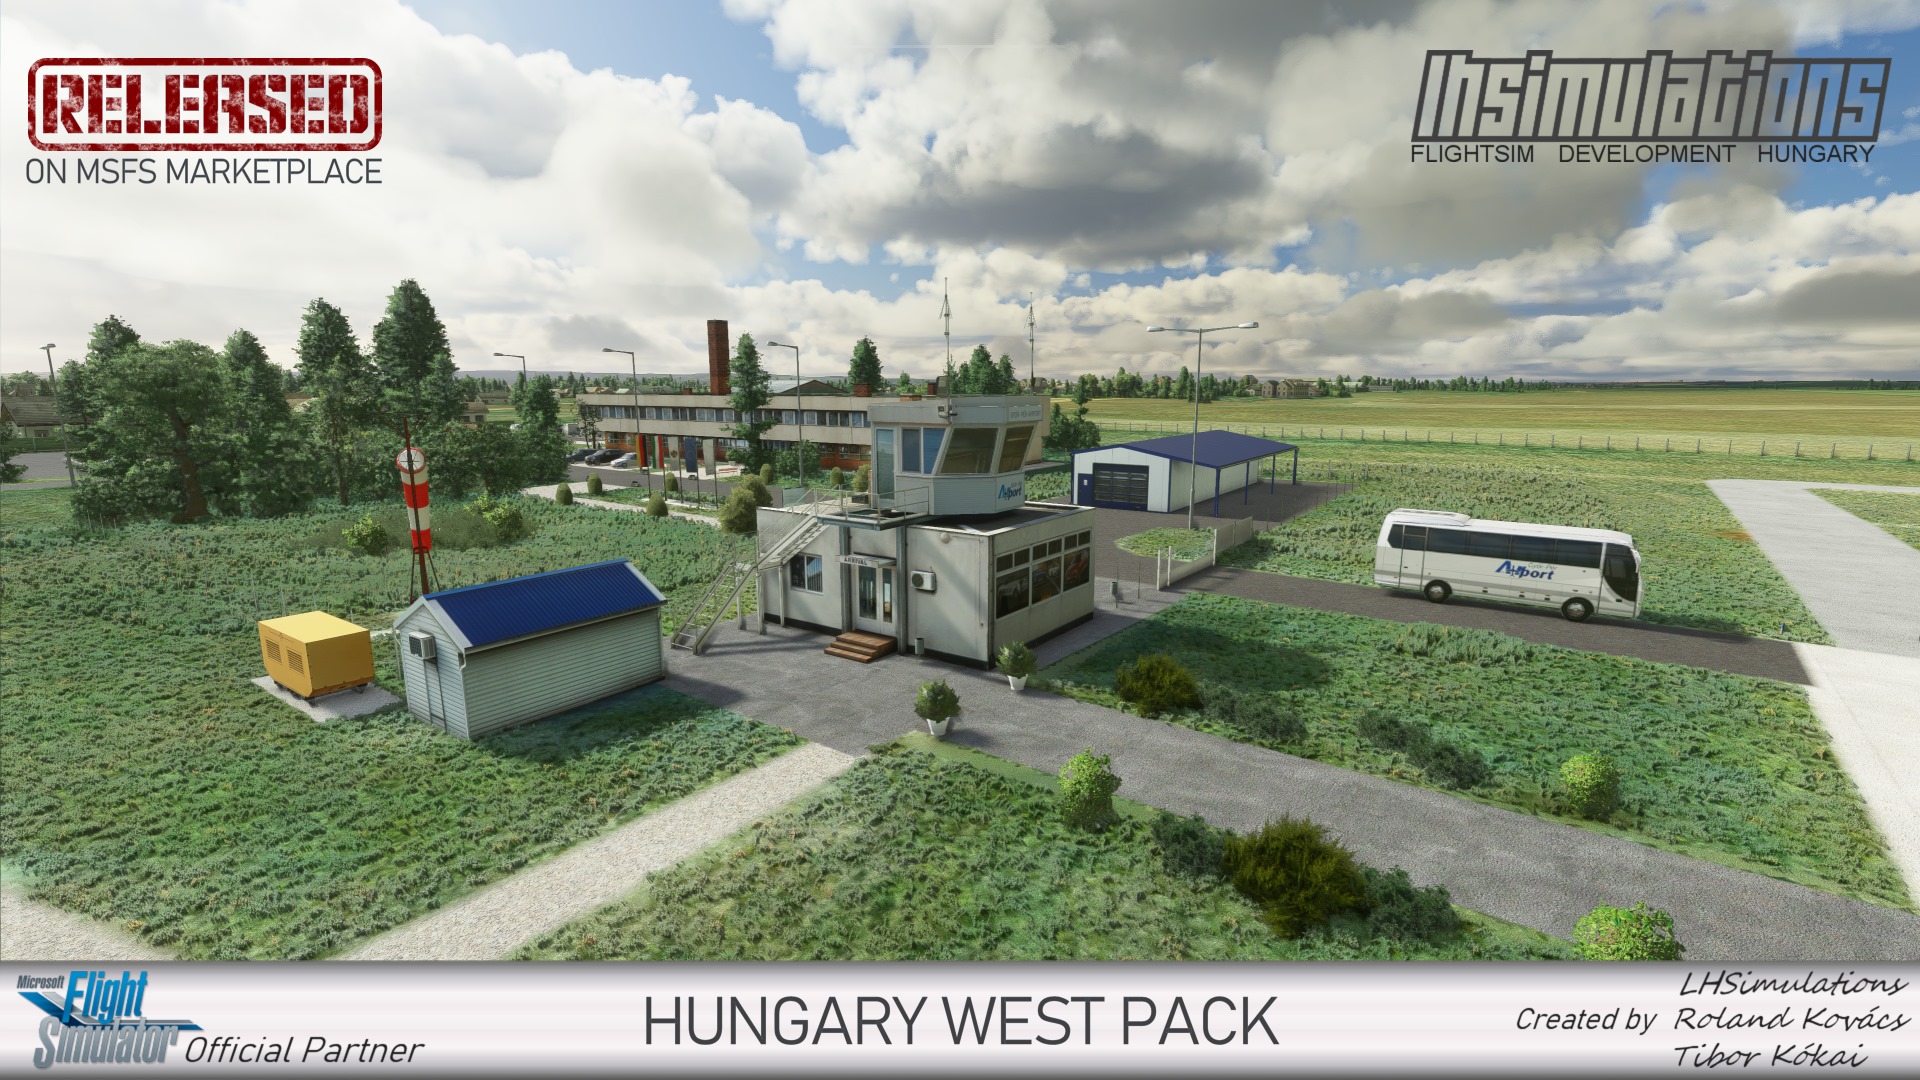 LHSimulations Releases Hungary West Pack for MSFS - LHSimulations, Microsoft Flight Simulator